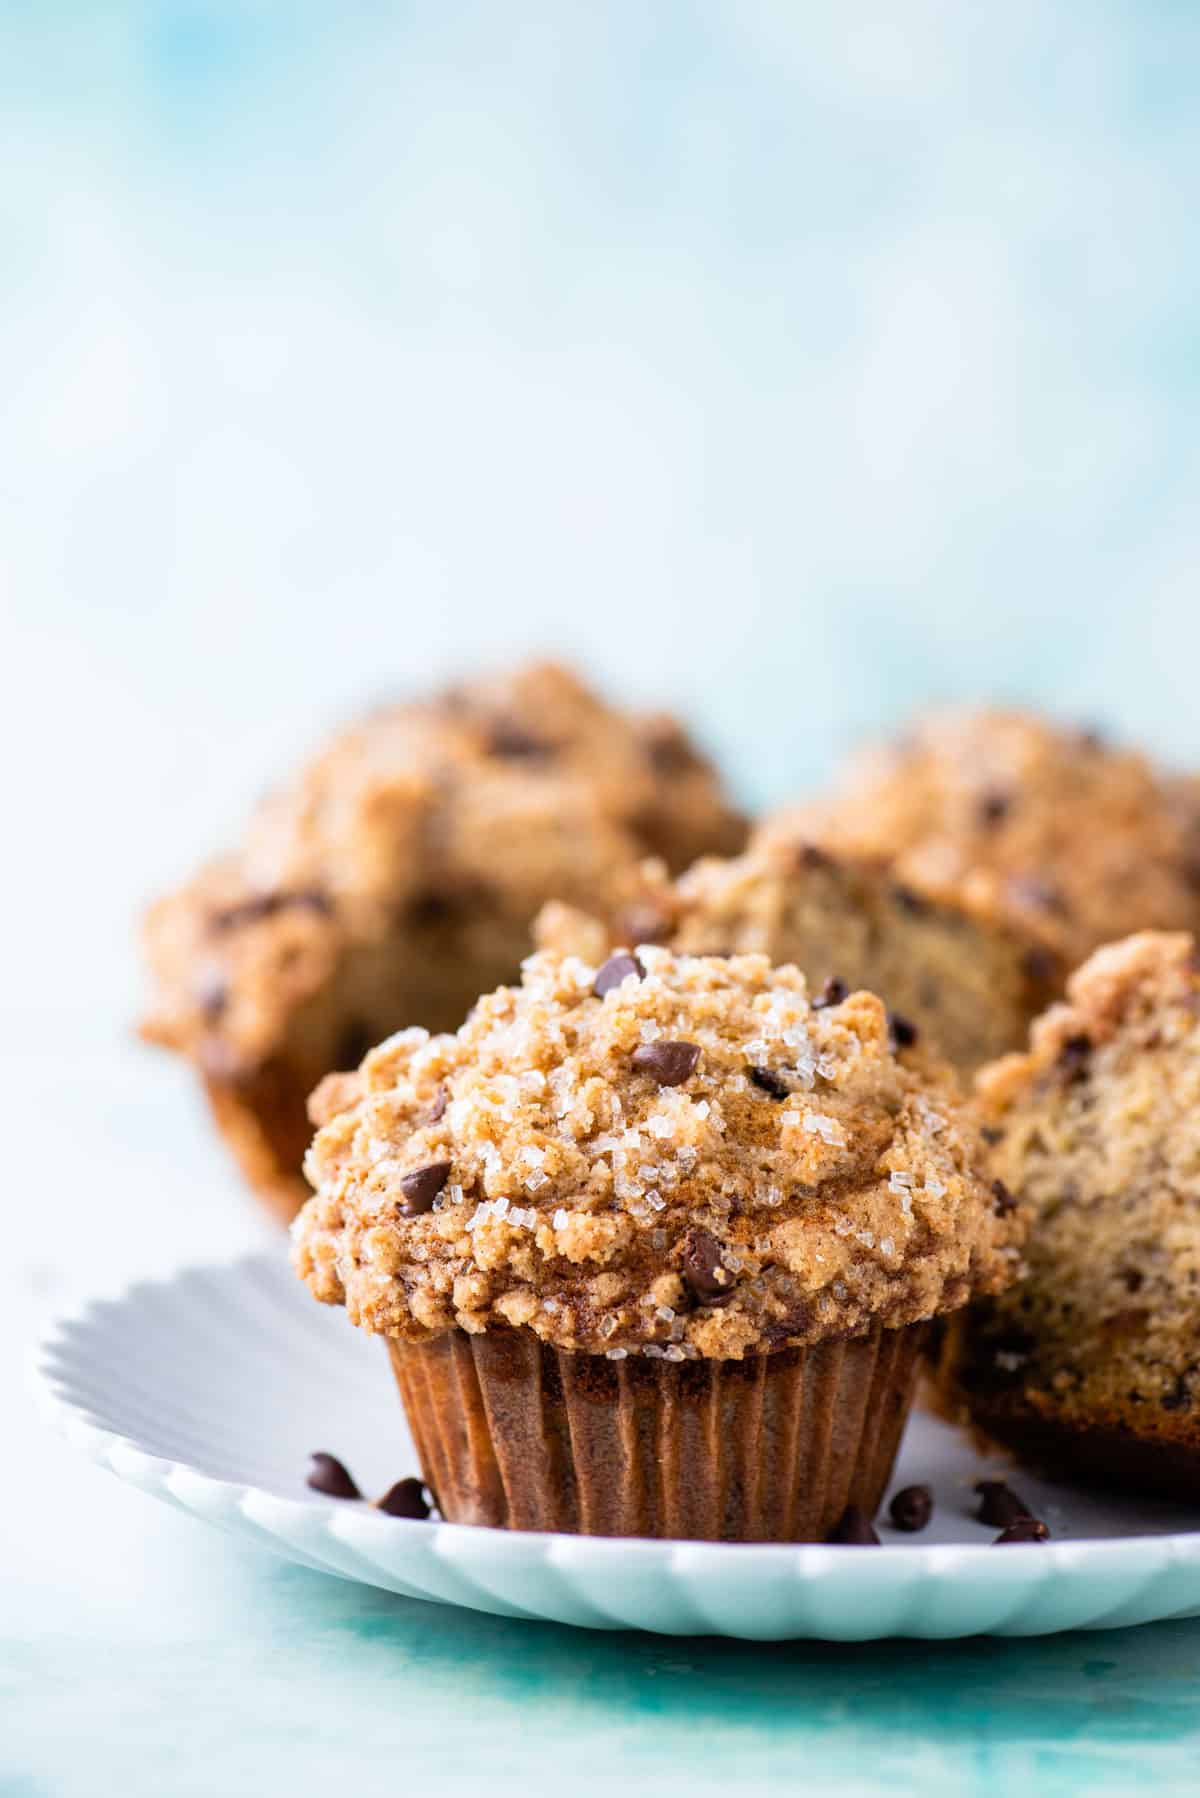 banana chocolate chip muffins on a white plate sitting on a light teal surface with chocolate chips sprinkled around